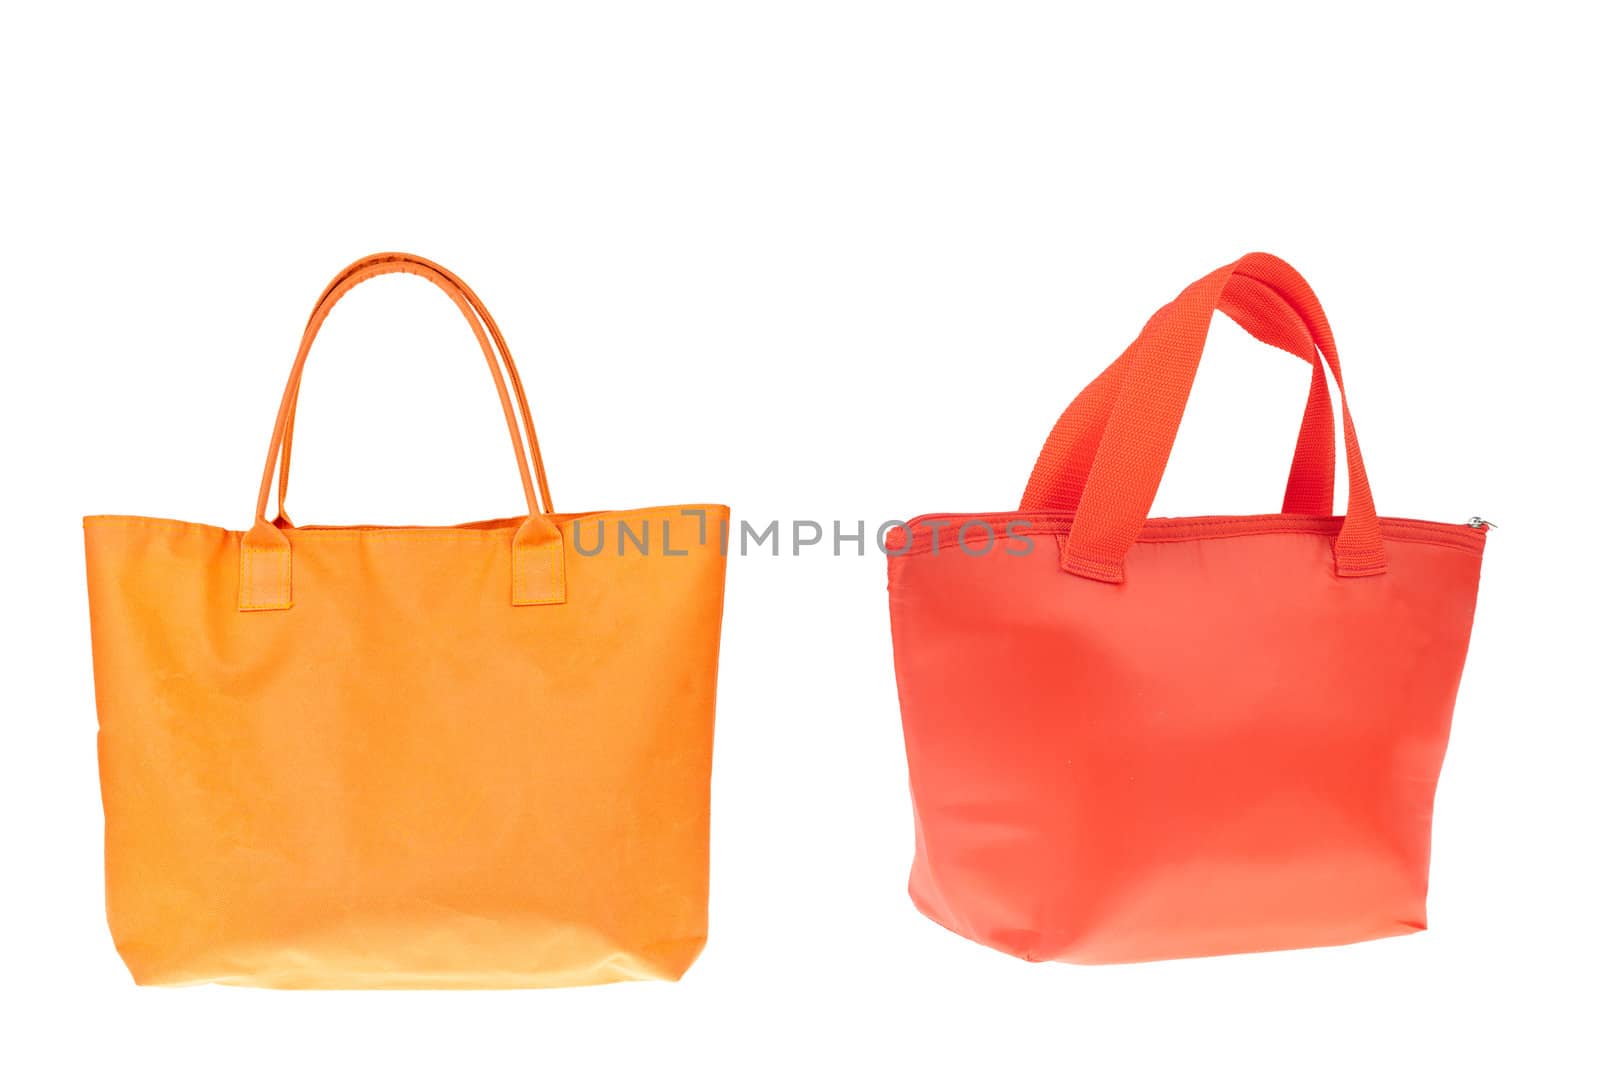 Colorful orange and red cotton bag on white isolated background.